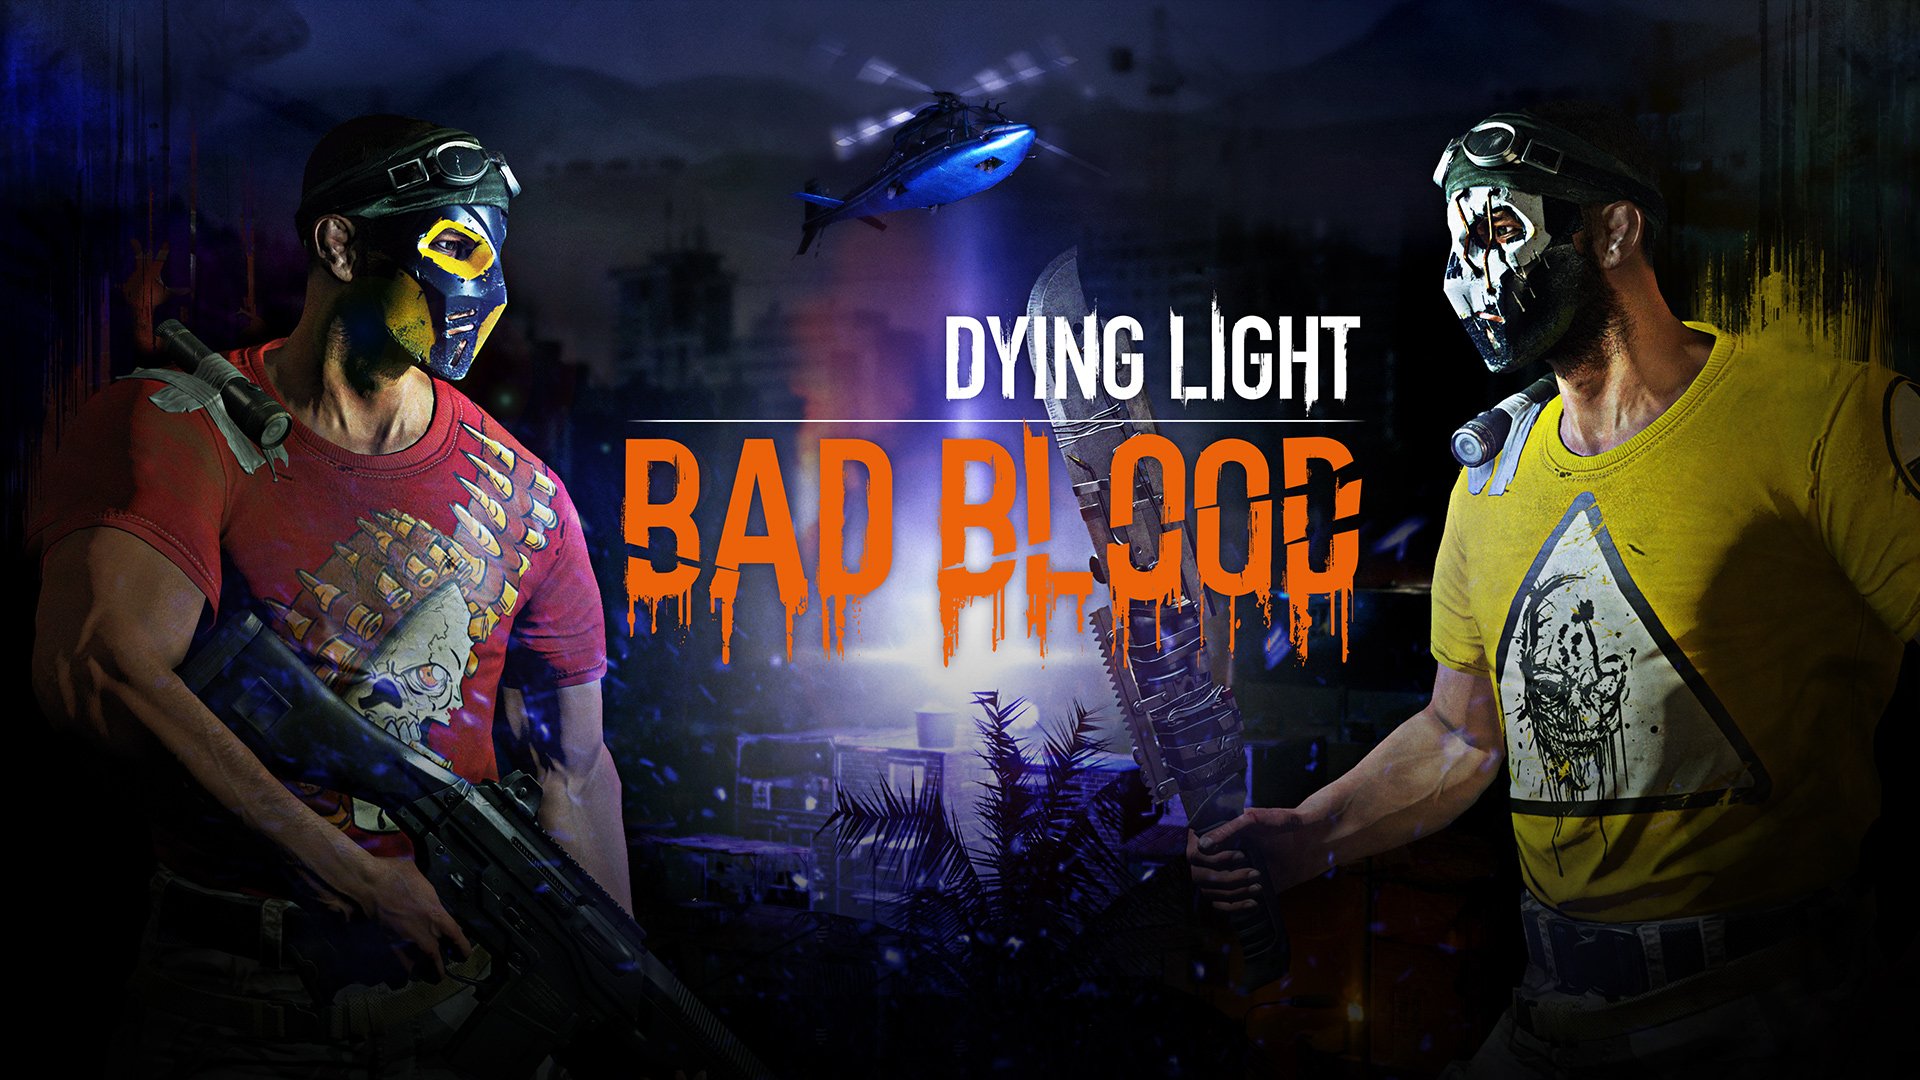 is dying light bad blood for mac